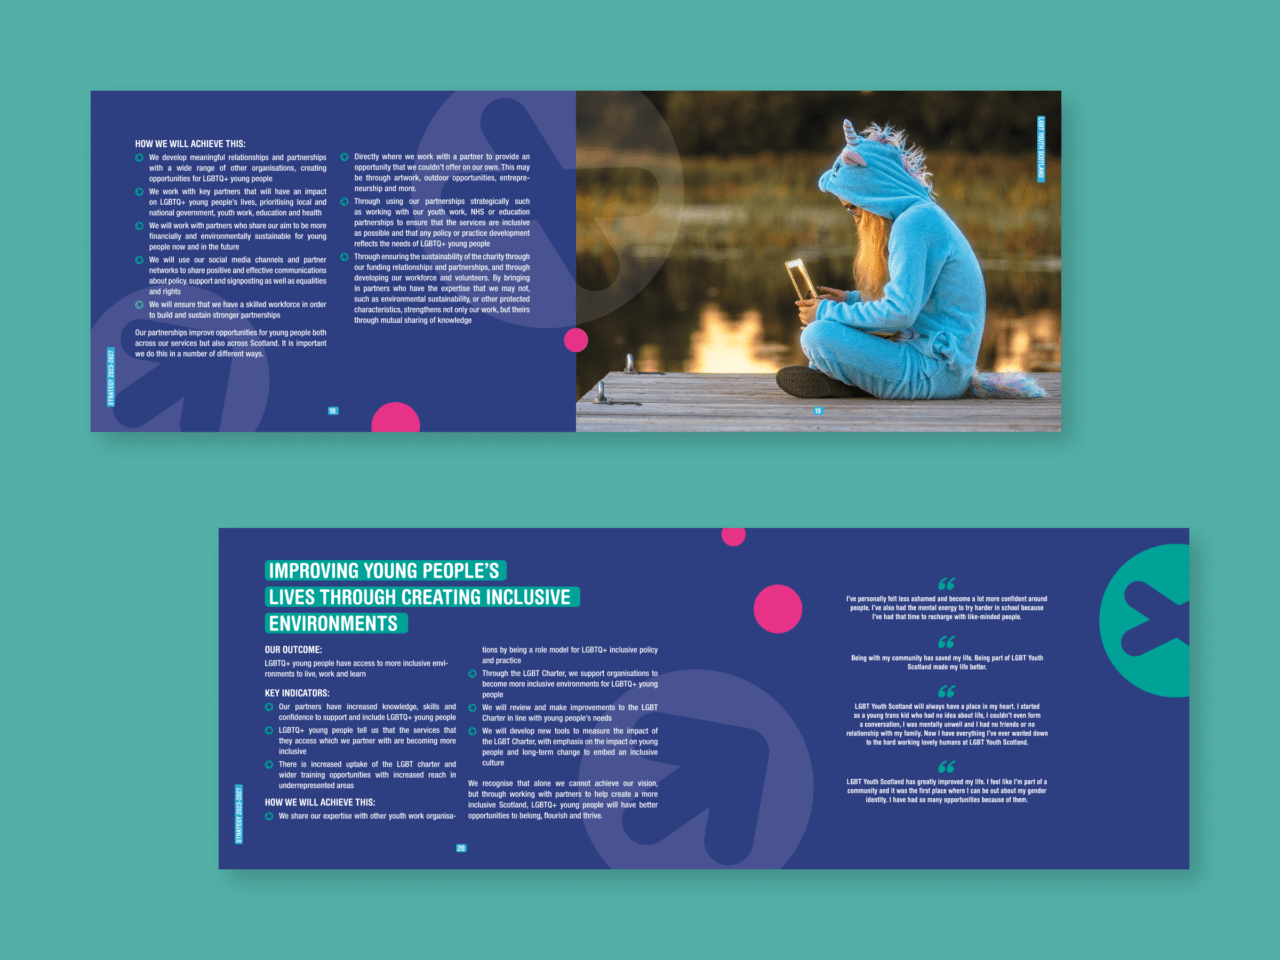 Previews of LGBT Youth Scotland's strategy report on a teal background